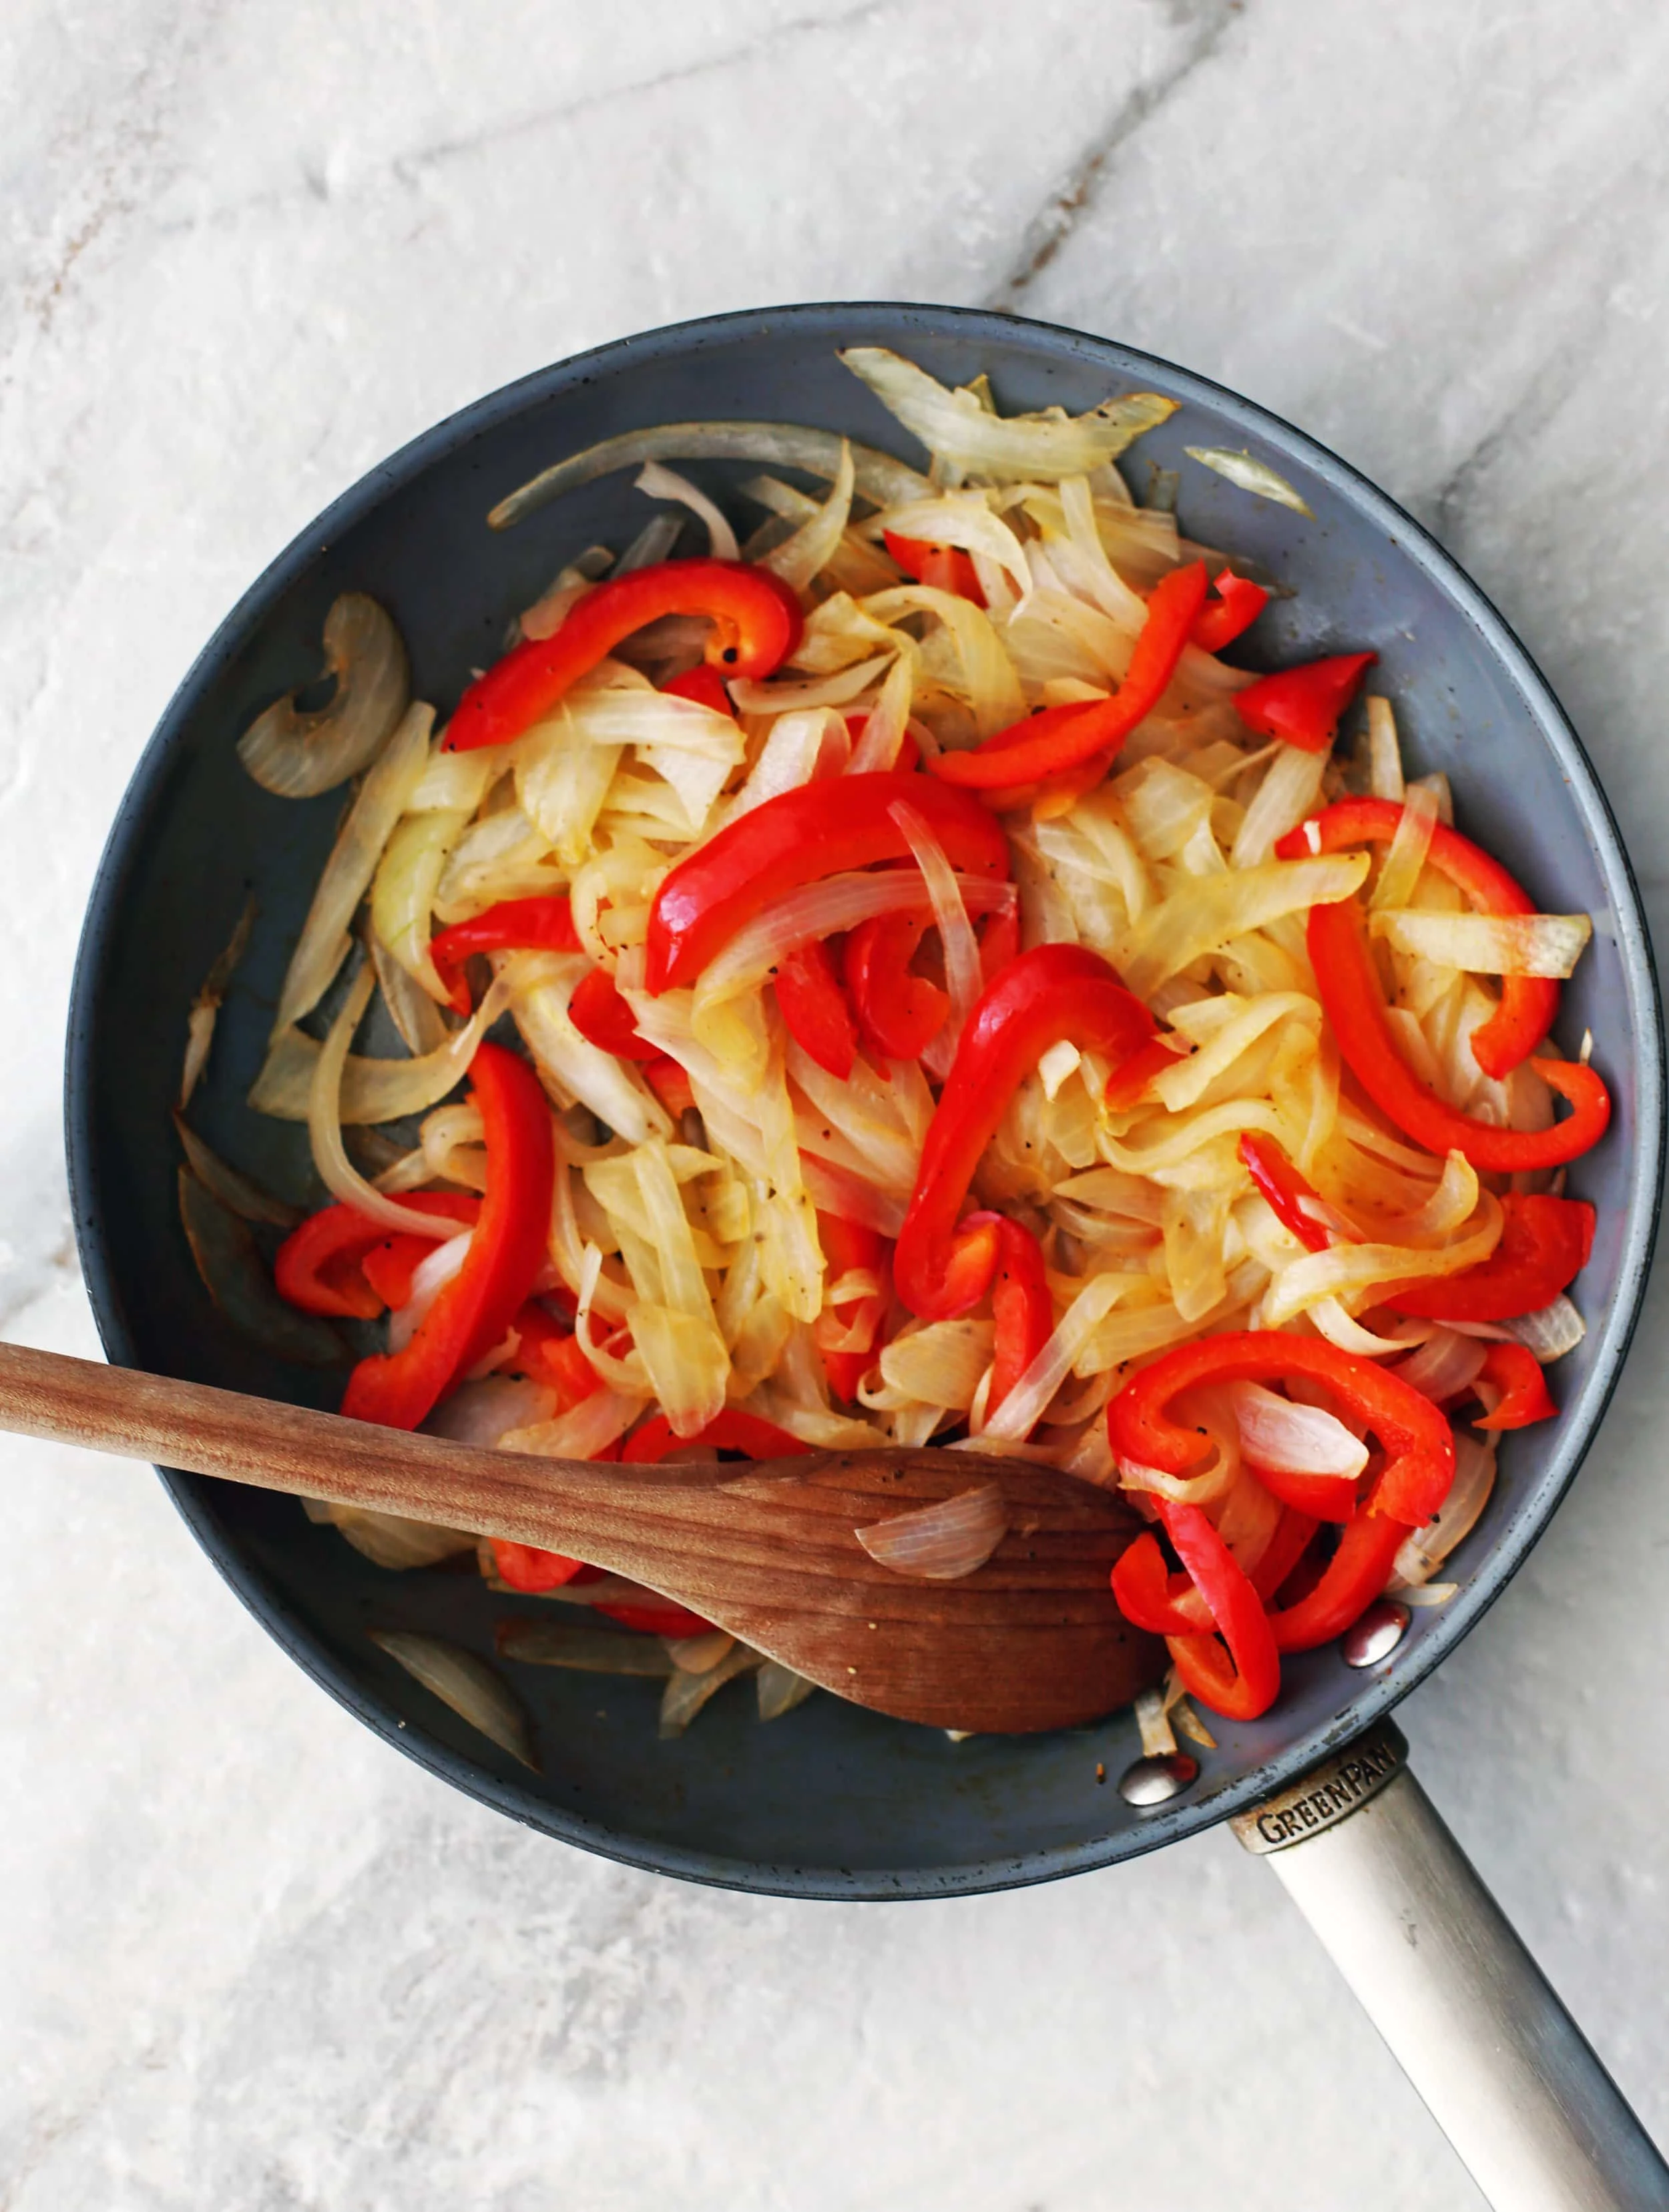 Sauteed sliced onions and peppers in a skillet with a wooden spoon.